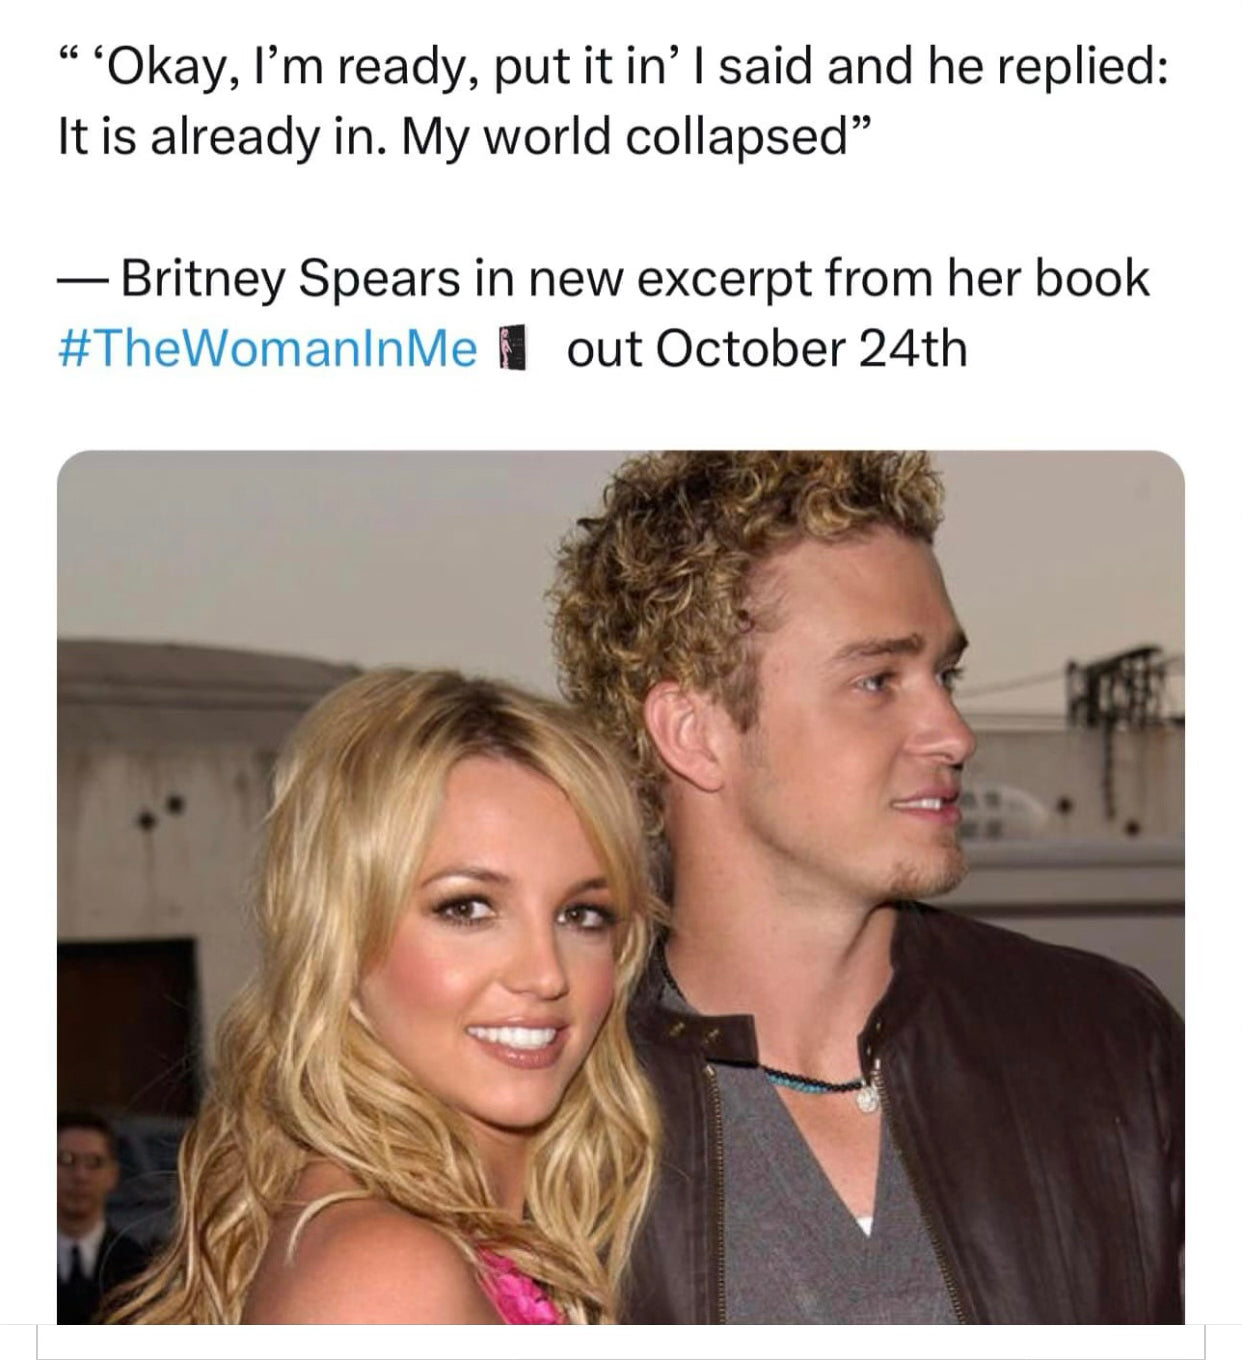 meme from October 2023: "'Okay, I'm ready put it in' I said and he replied: It is already in. My world collapsed" – Britney Spears in new excerpt from her book #TheWomanInMe , photo of Britney Spears and Justin Timberlake from c. 2000